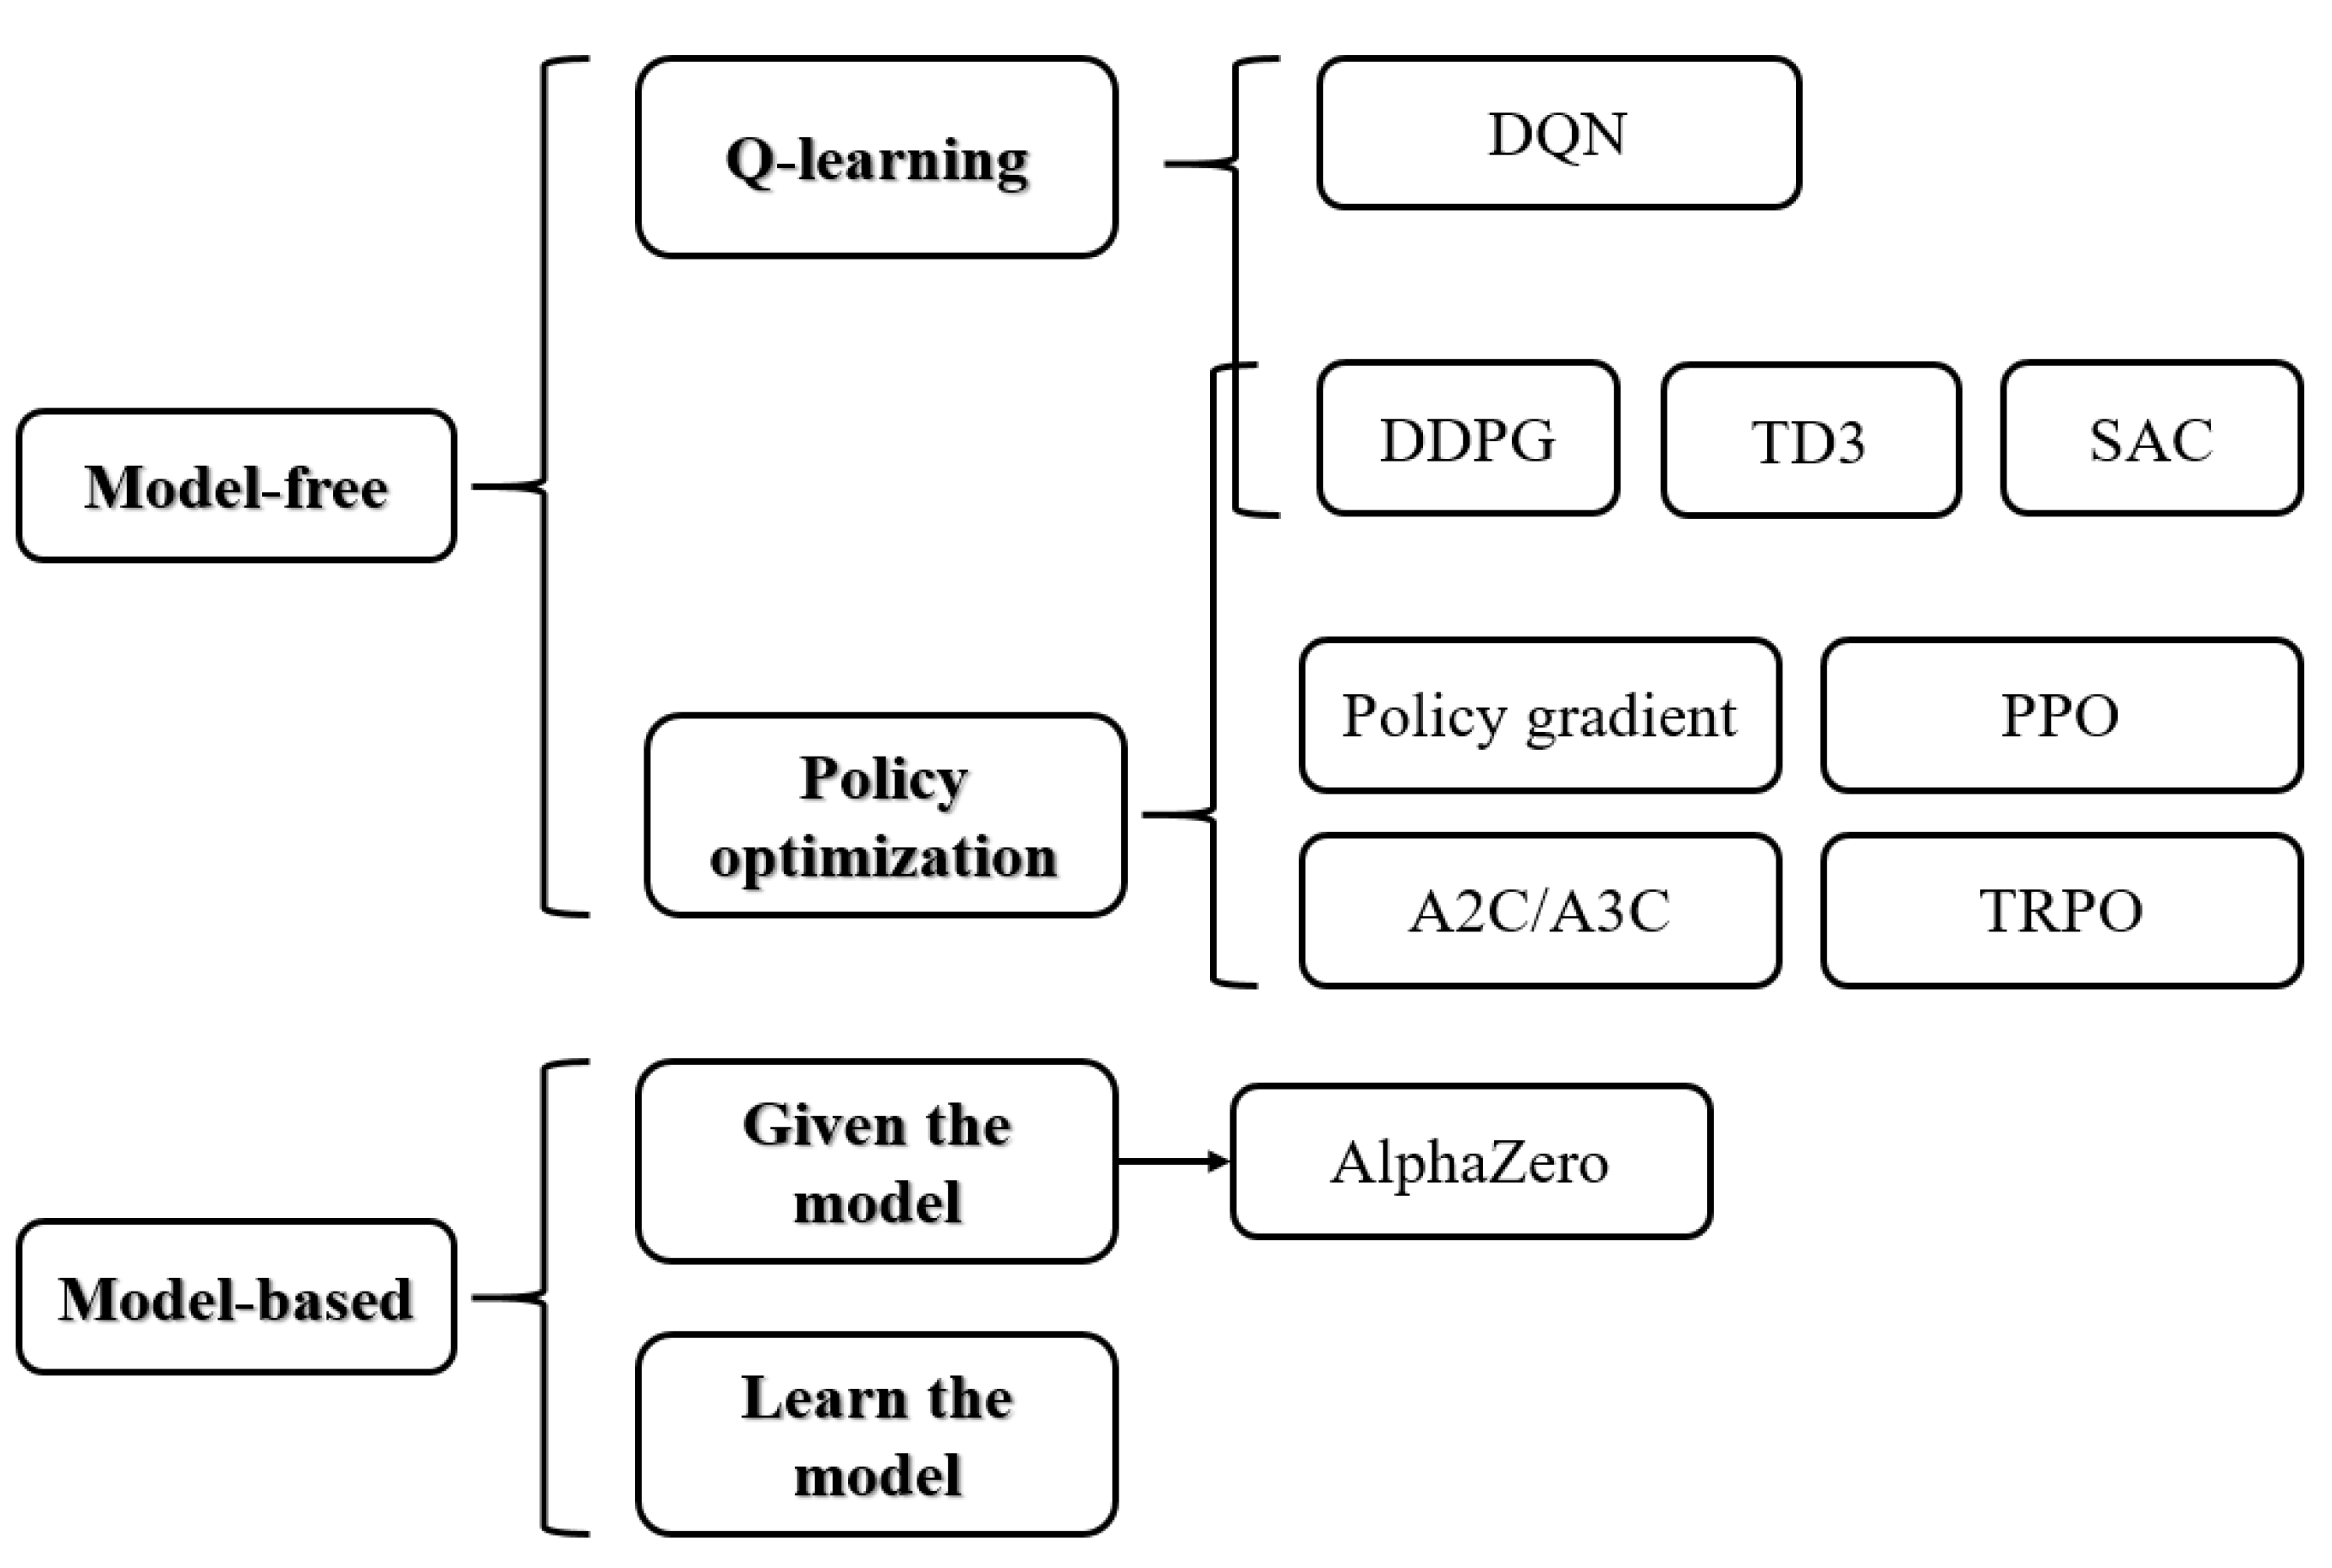 Value targets in off-policy AlphaZero: a new greedy backup